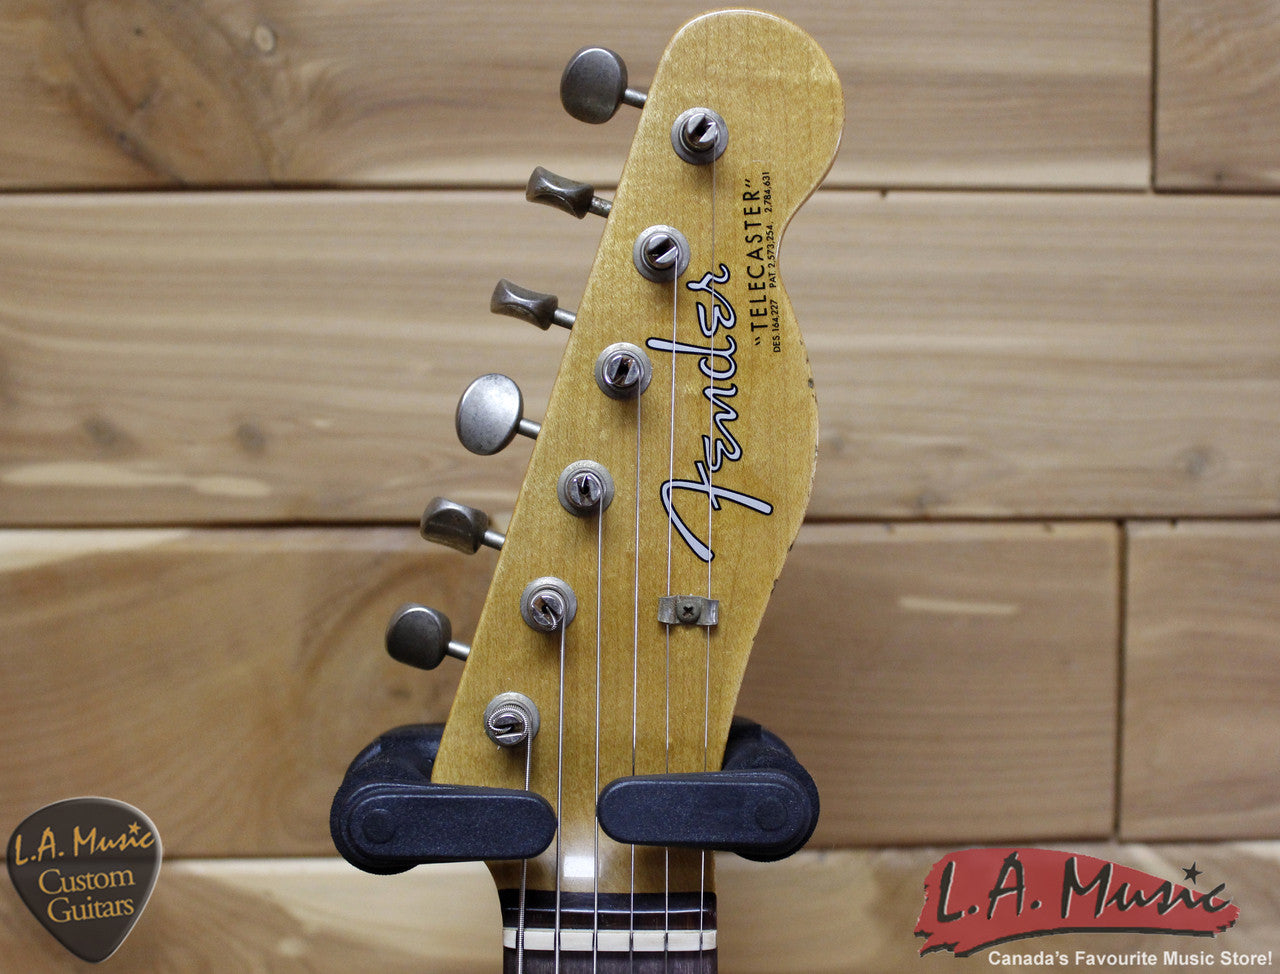 Fender Custom Shop 1963 Telecaster Journeyman Relic Rosewood Faded 3-Tone Sunburst - 9230300800 - Serial Number - R83496 - L.A. Music - Canada's Favourite Music Store!